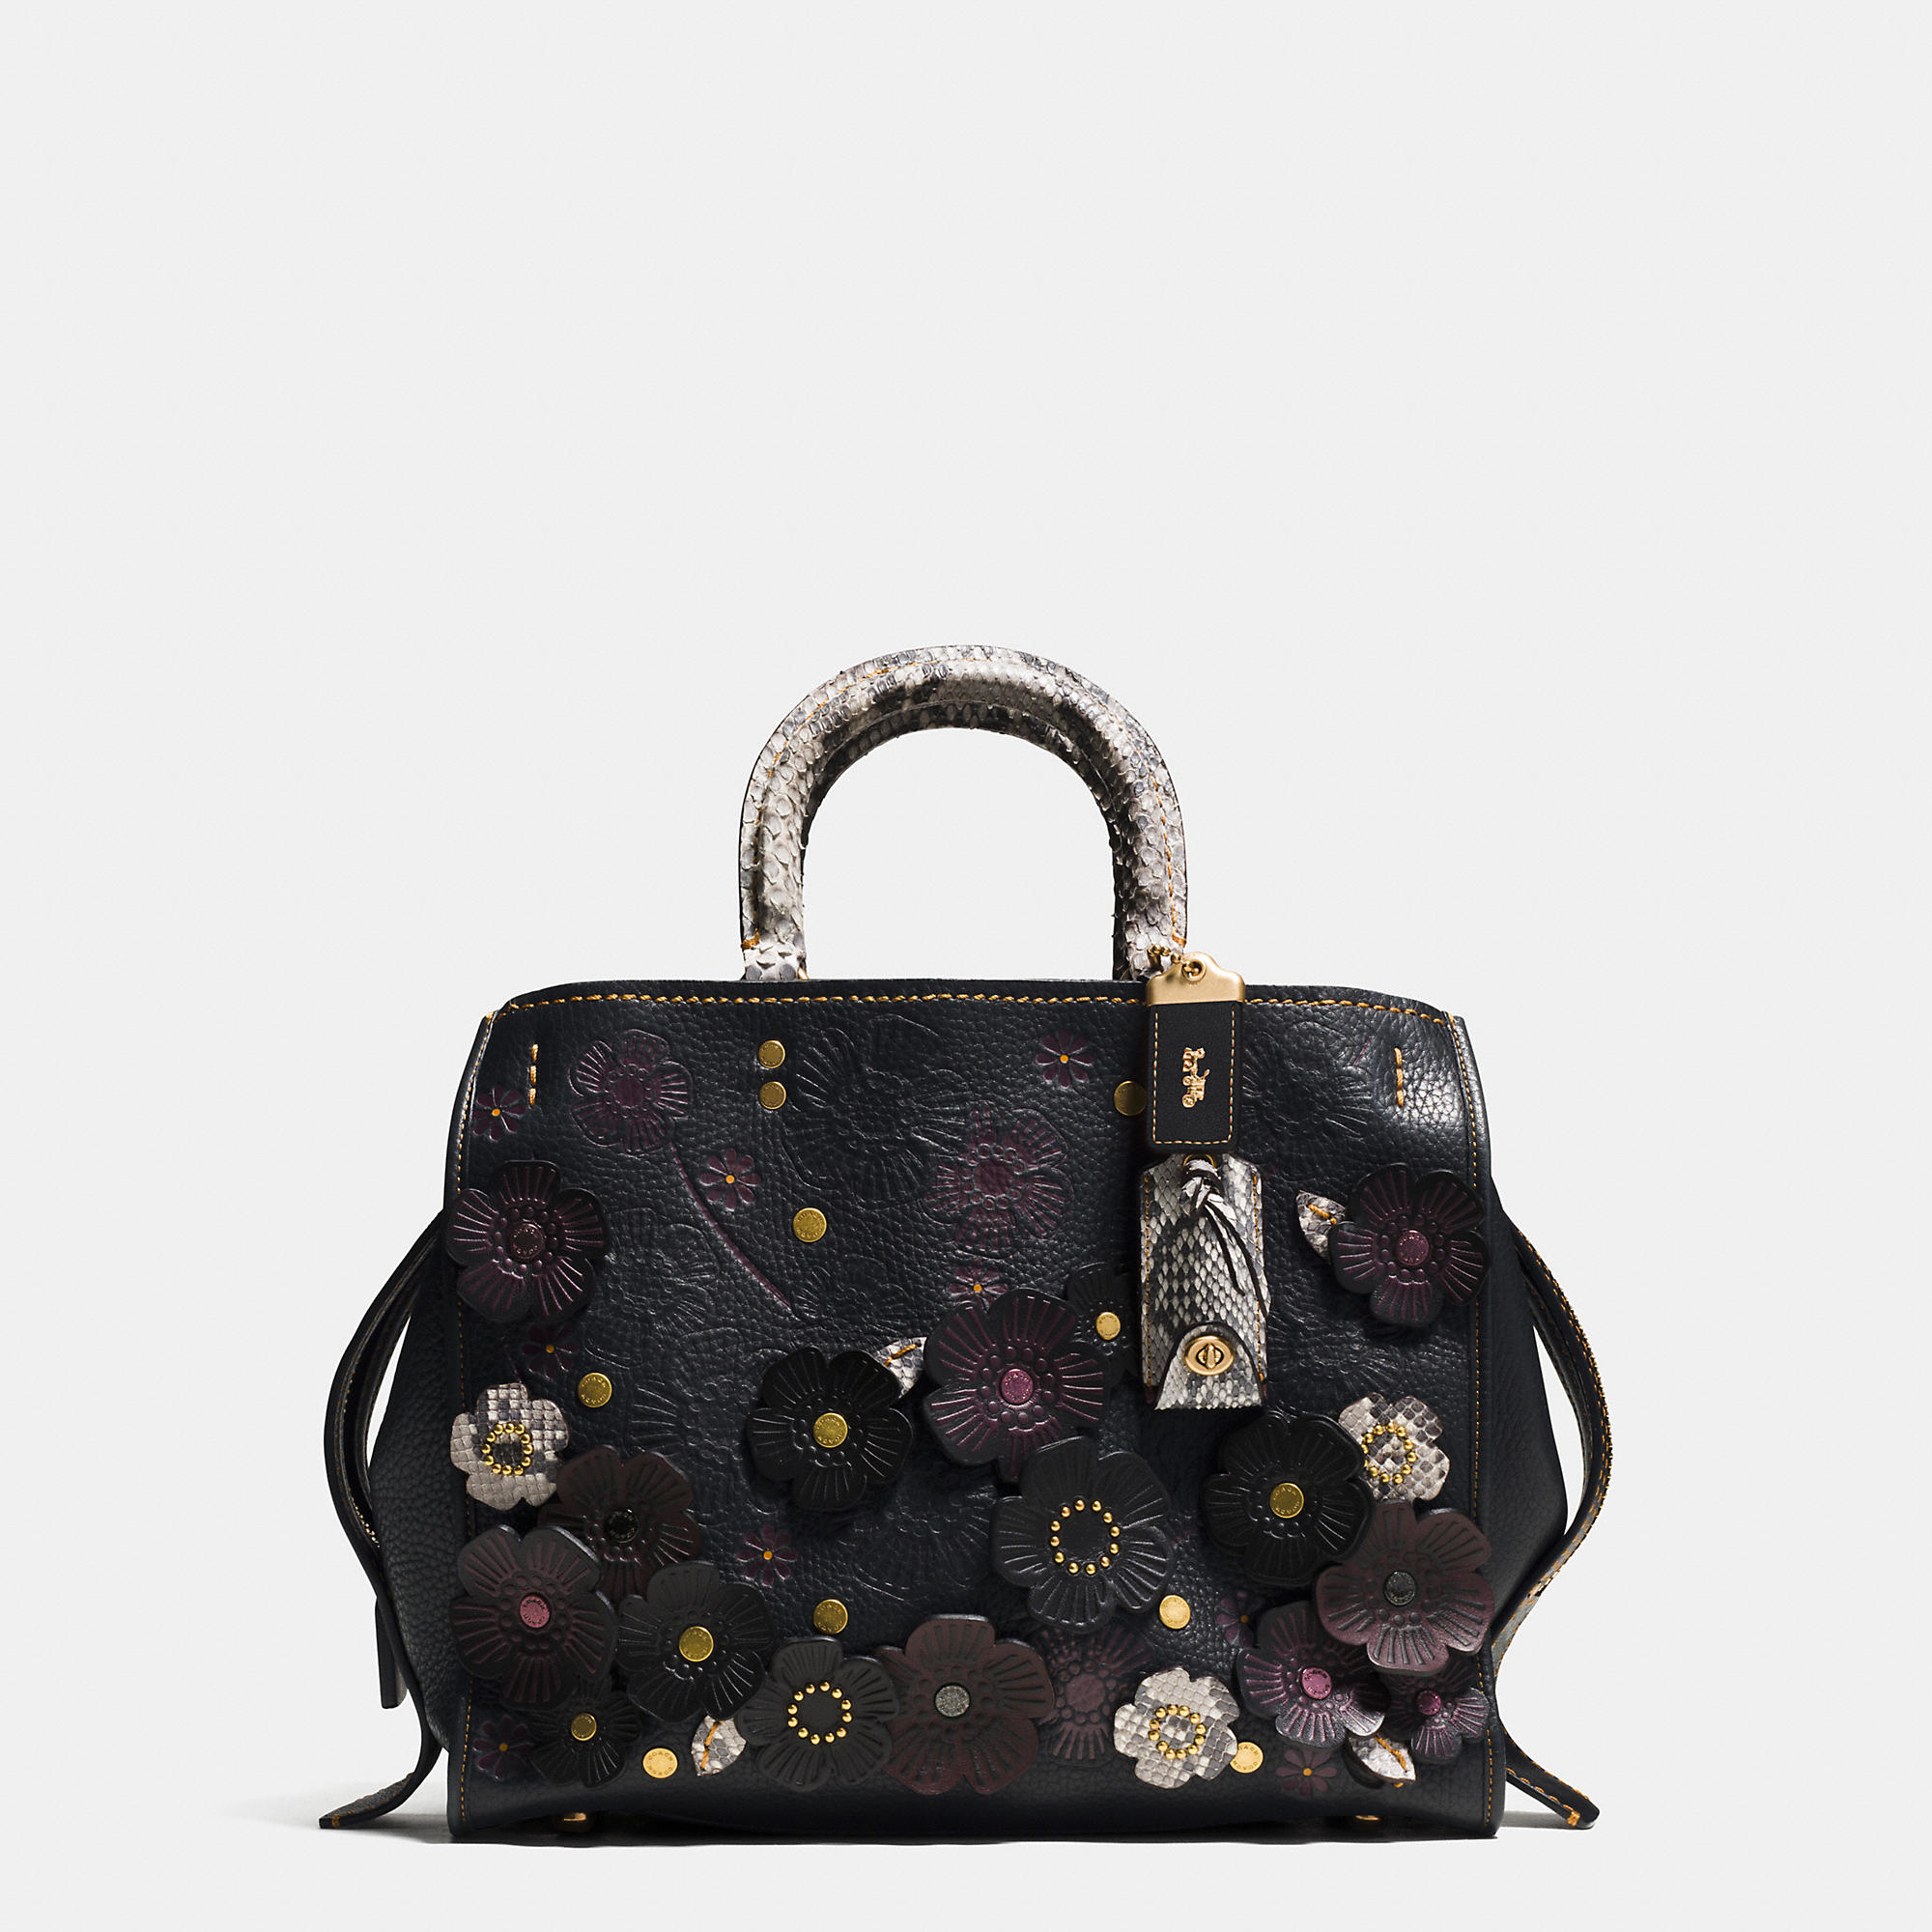 Lyst - Coach Tea Rose Applique Rogue Bag In Exotic Leather in Black